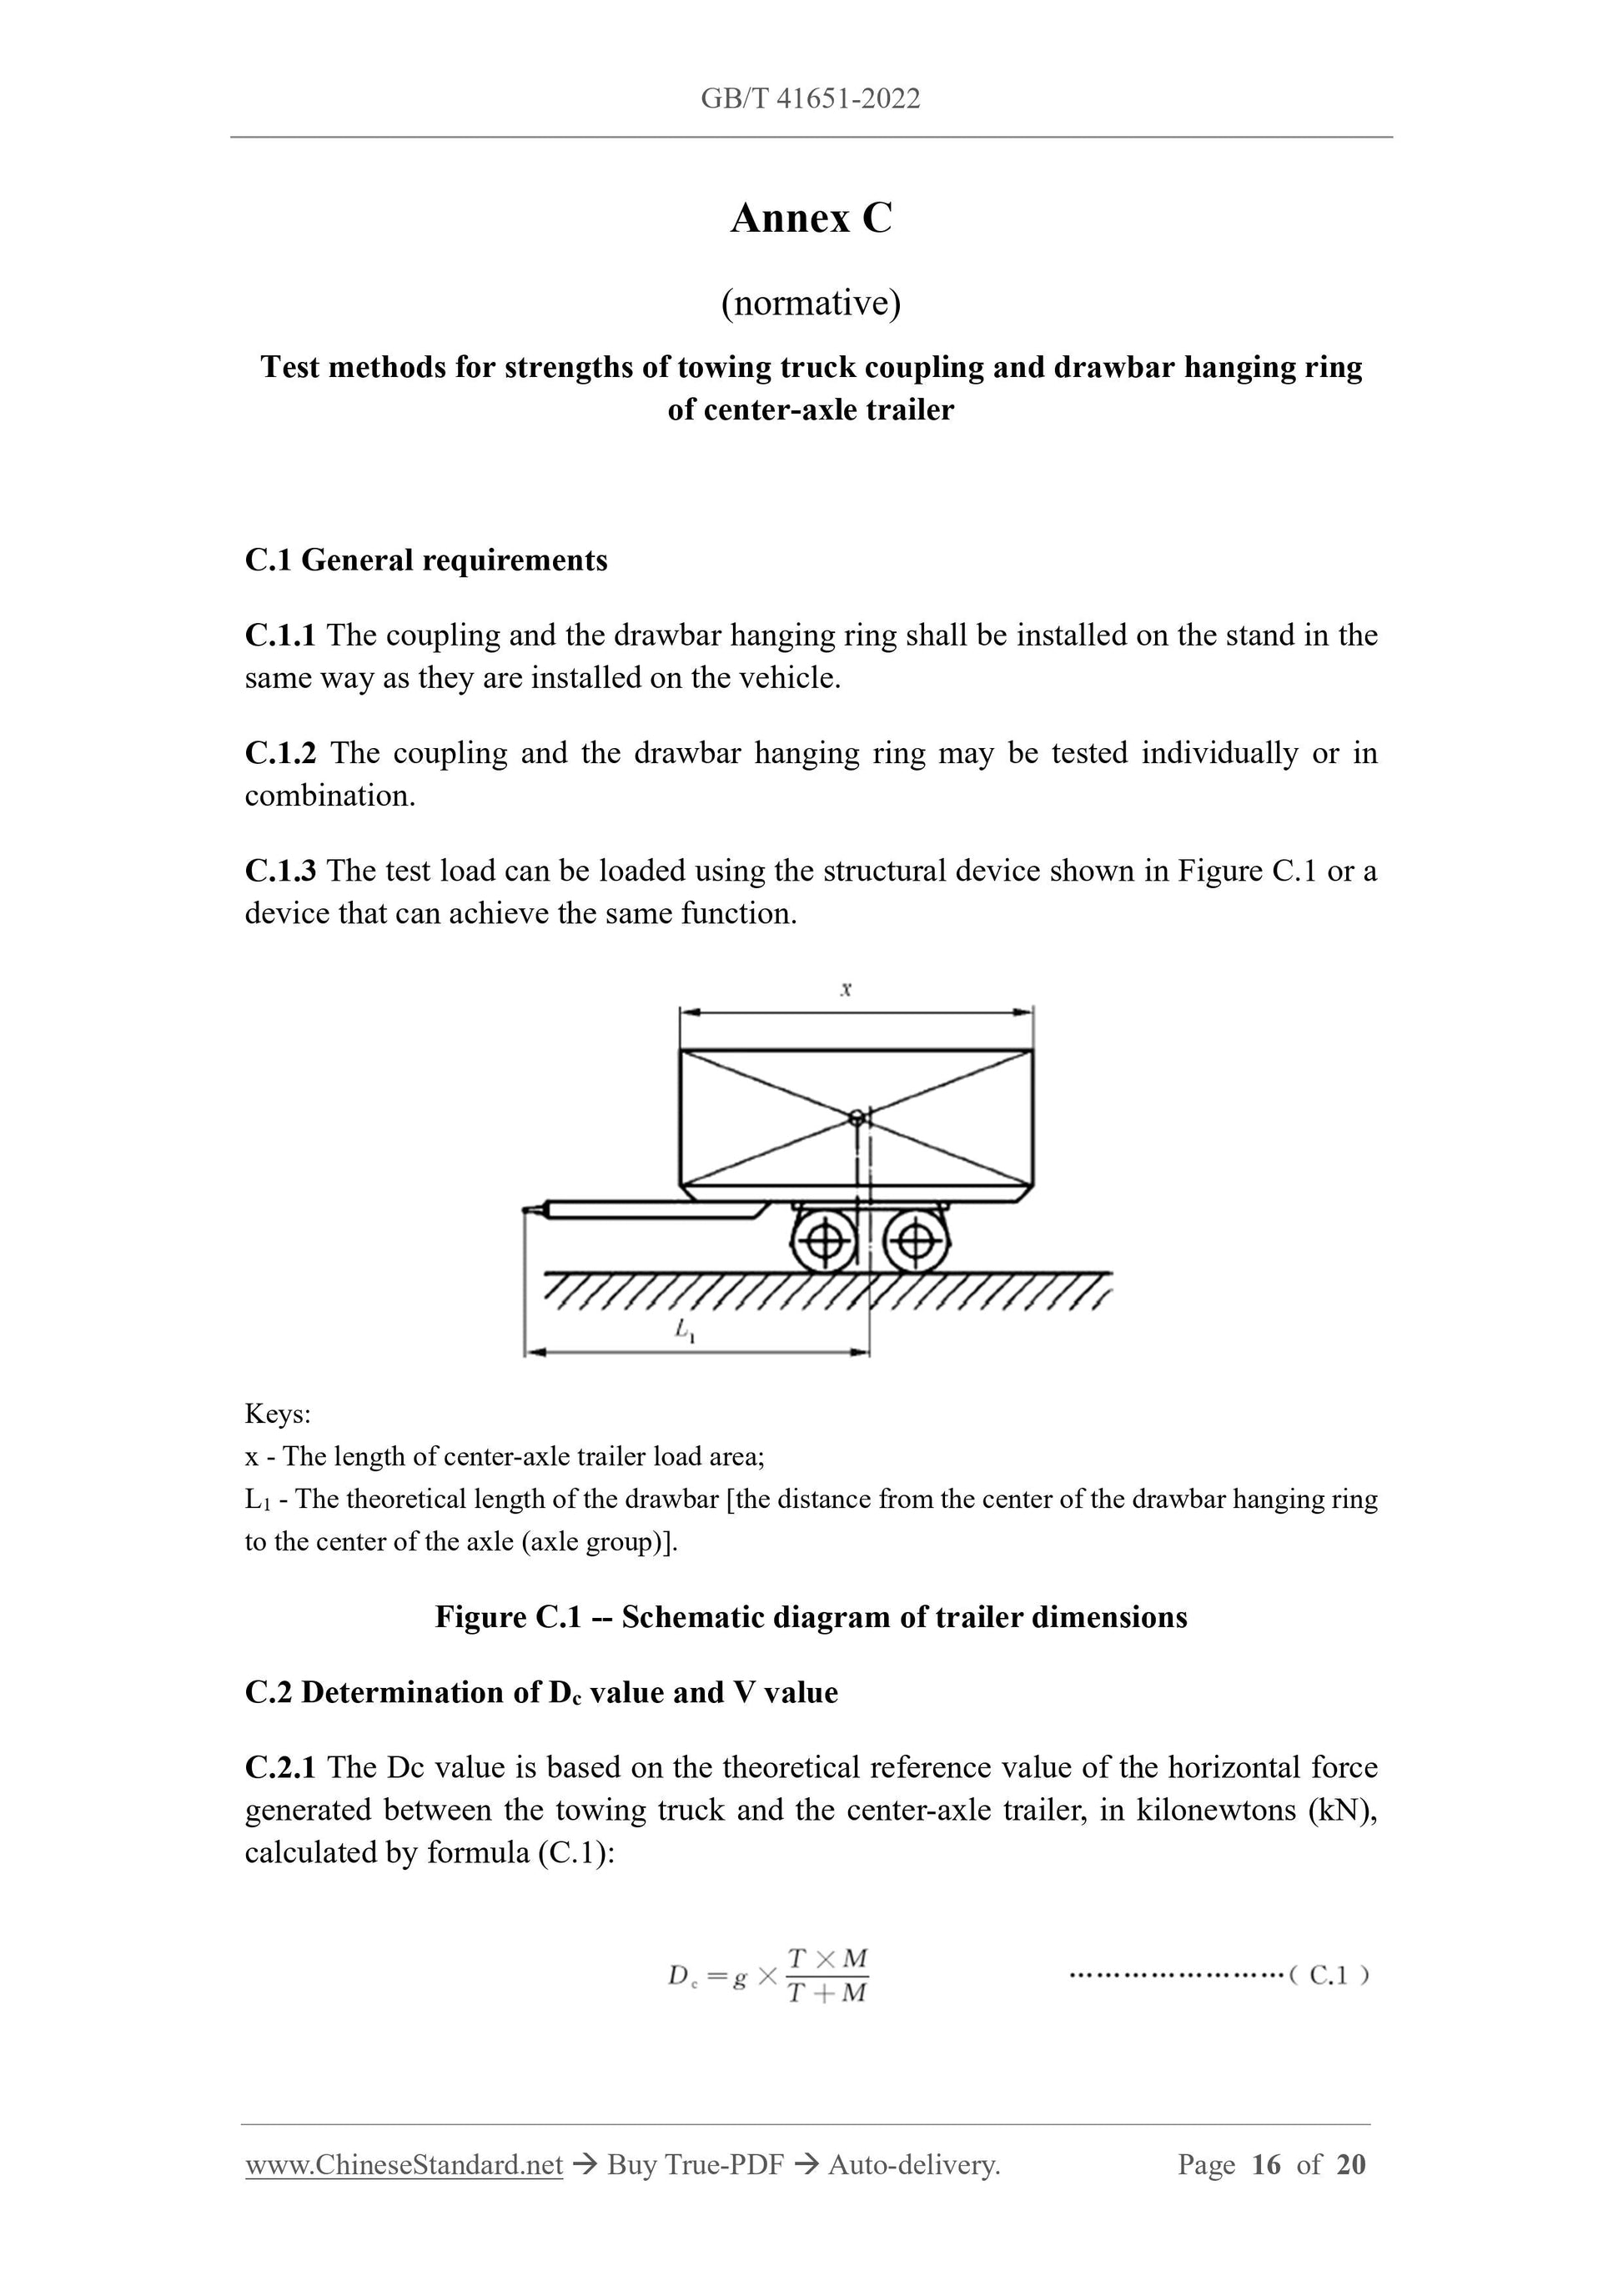 GB/T 41651-2022 Page 5